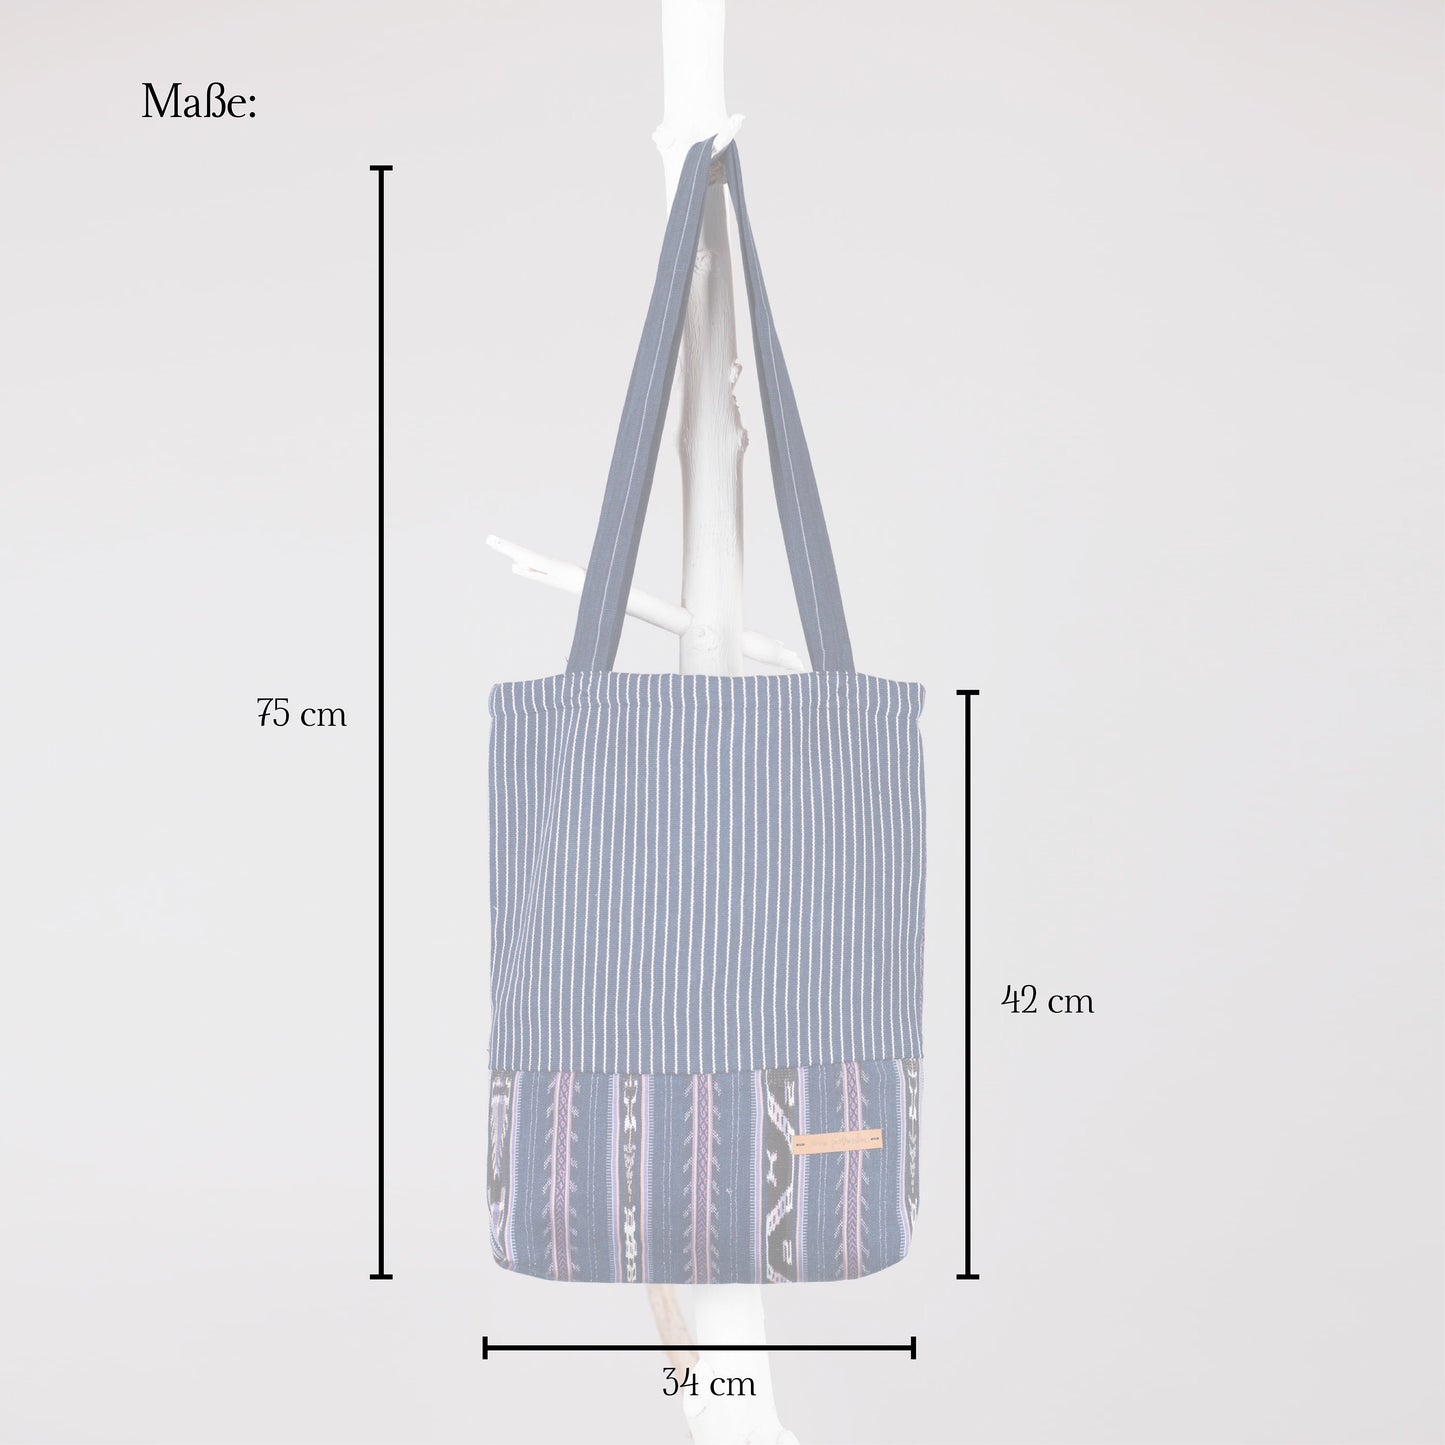 Stable hand-woven bag with inner pocket No.04, UNIKAT, lined, canvas, cotton, jute bag, fabric bag